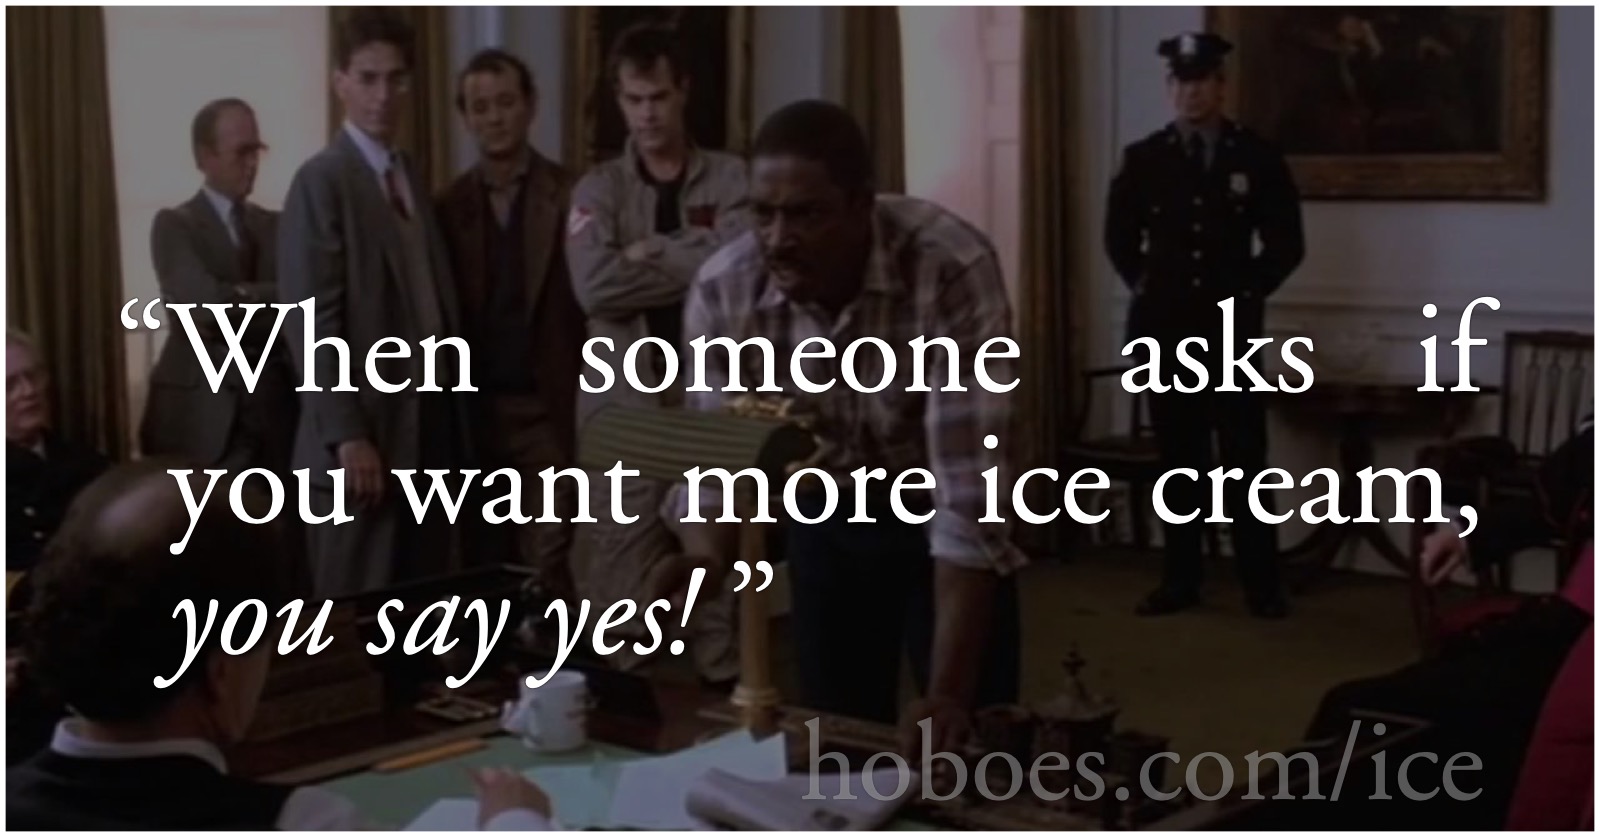 When someone asks if you want ice cream…: Ghostbusters: when someone asks if you want more ice cream, you say yes! Social media image for Ice Cream Trilogy, hoboes.com/ice.; Ghostbusters; ice cream